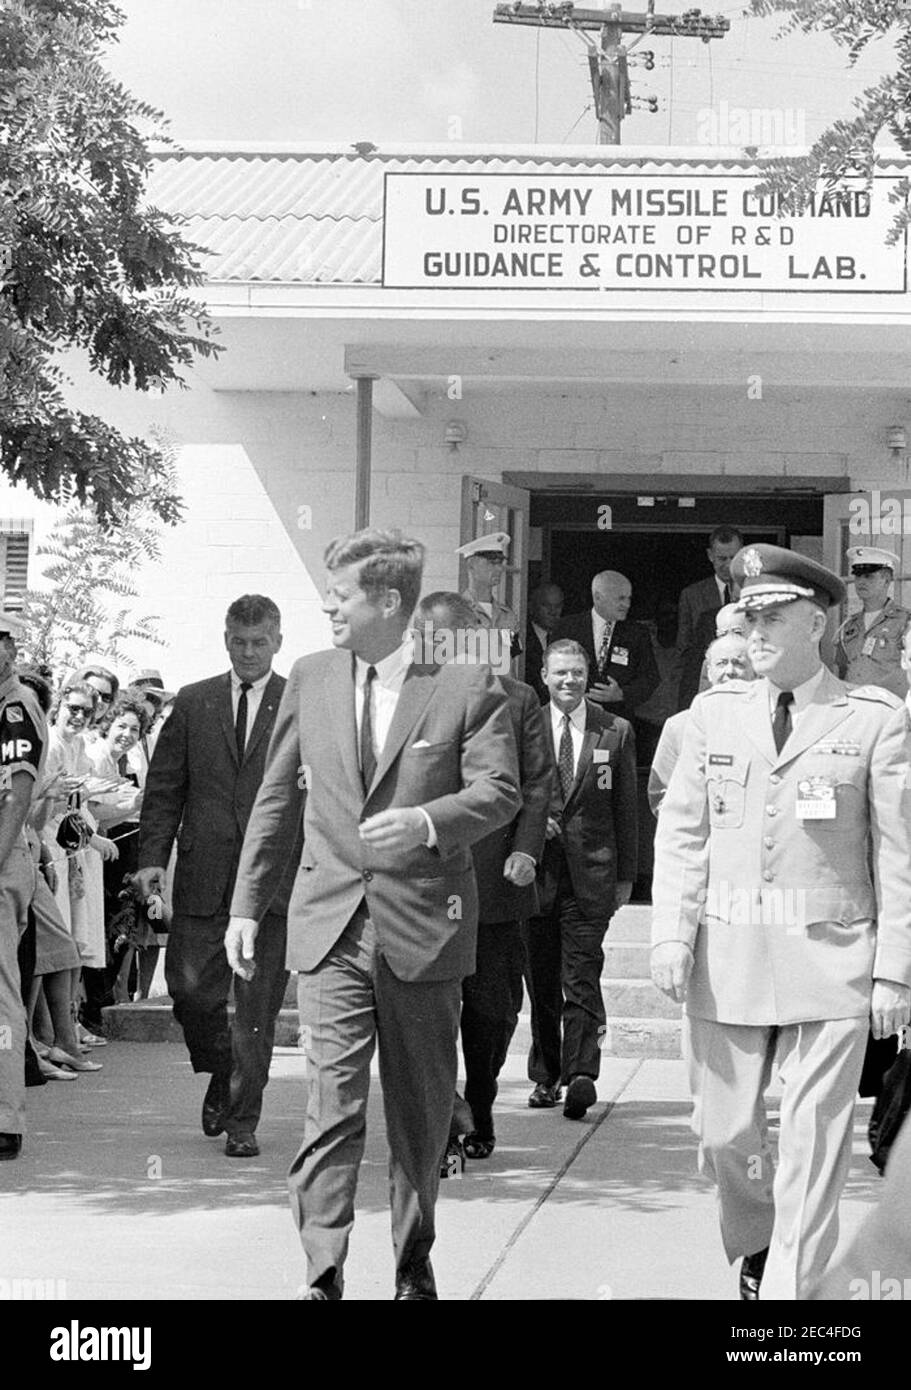 Inspection tour of NASA installations: Huntsville Alabama, Redstone Army Airfield and George C. Marshall Space Flight Center, 9:35AM. President John F. Kennedy walks with Commanding General of the U.S. Army Missile Command, Major General Francis J. McMorrow (right), following a tour of the U.S. Army Missile Command Guidance and Control Laboratory at Redstone Arsenal, Huntsville, Alabama. Also pictured: Vice President Lyndon B. Johnson; Secretary of Defense, Robert S. McNamara; Minister of Defence of Great Britain, Peter Thorneycroft; Secretary of the Air Force, Eugene M. Zuckert; Director of t Stock Photo